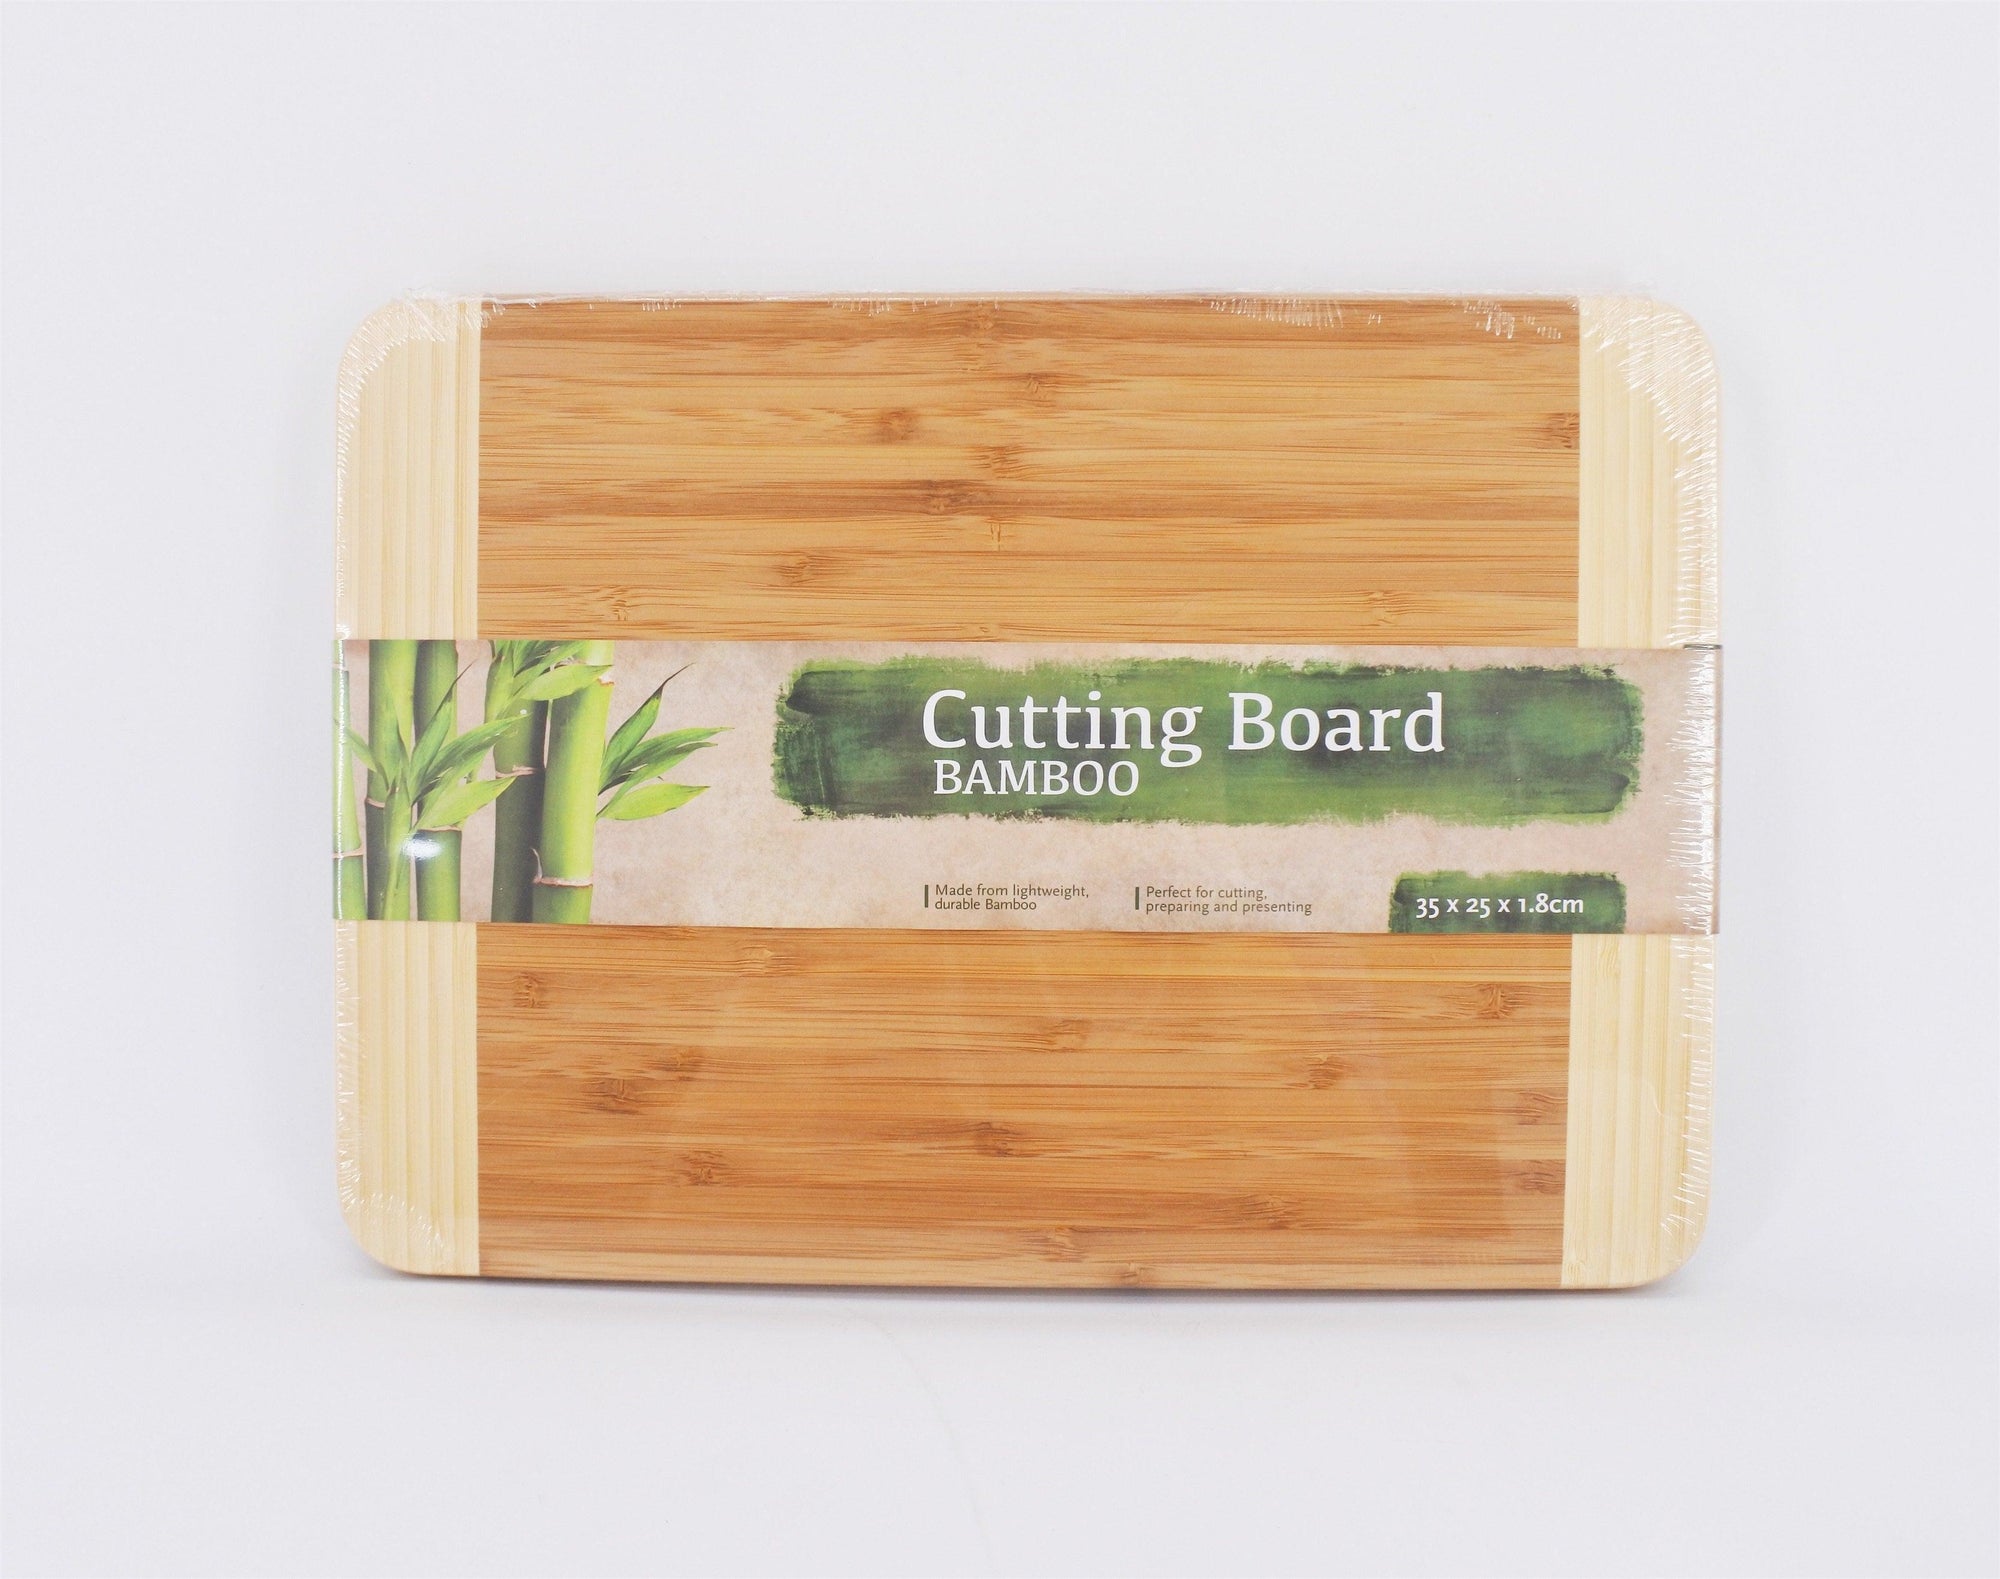 UBL Chopping Board Bamboo |35x25x1.8cm - Choice Stores